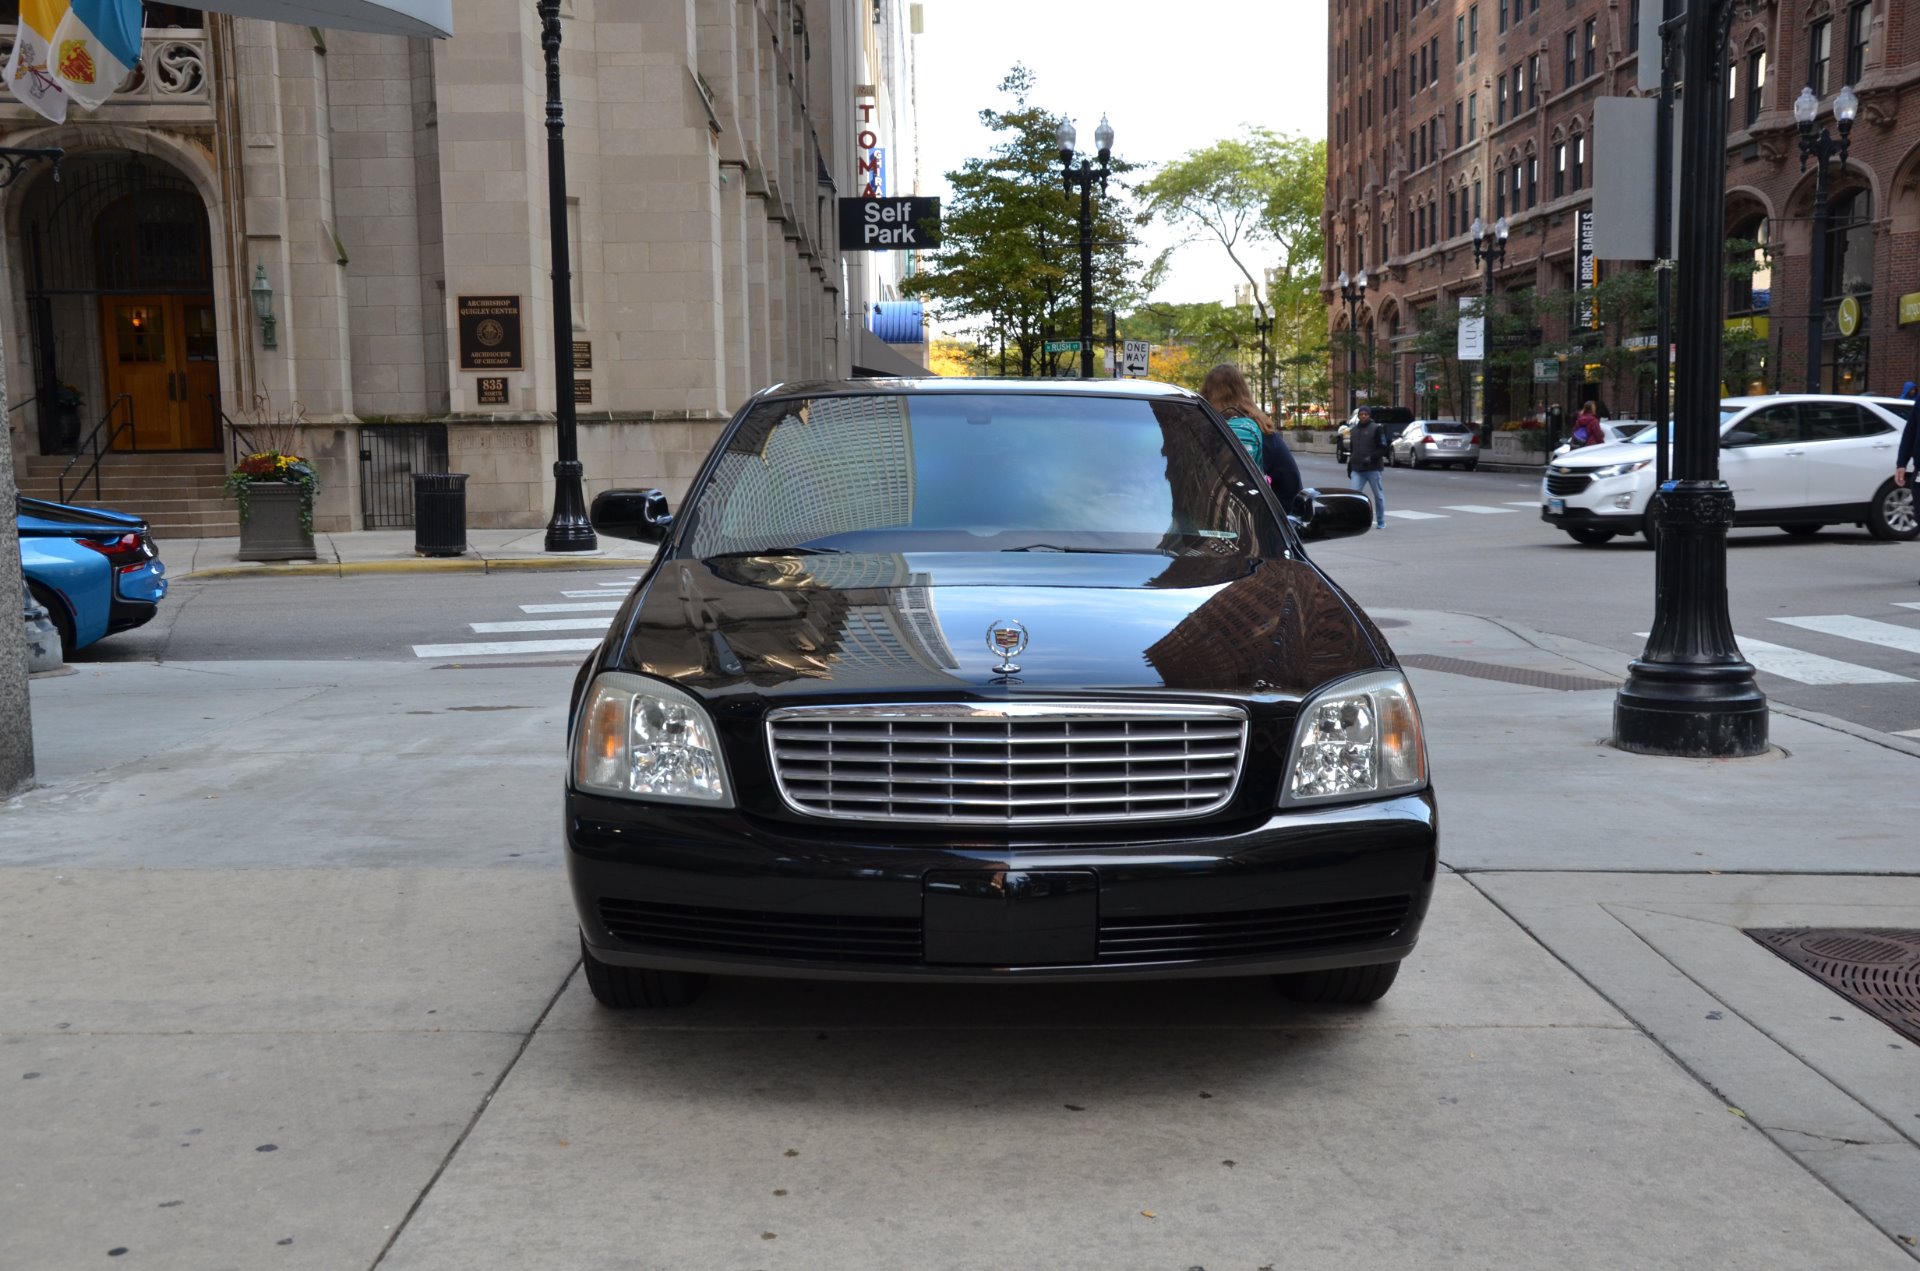 2004 Cadillac DTS Armored Limo Stock # GC2244 for sale near Chicago, IL